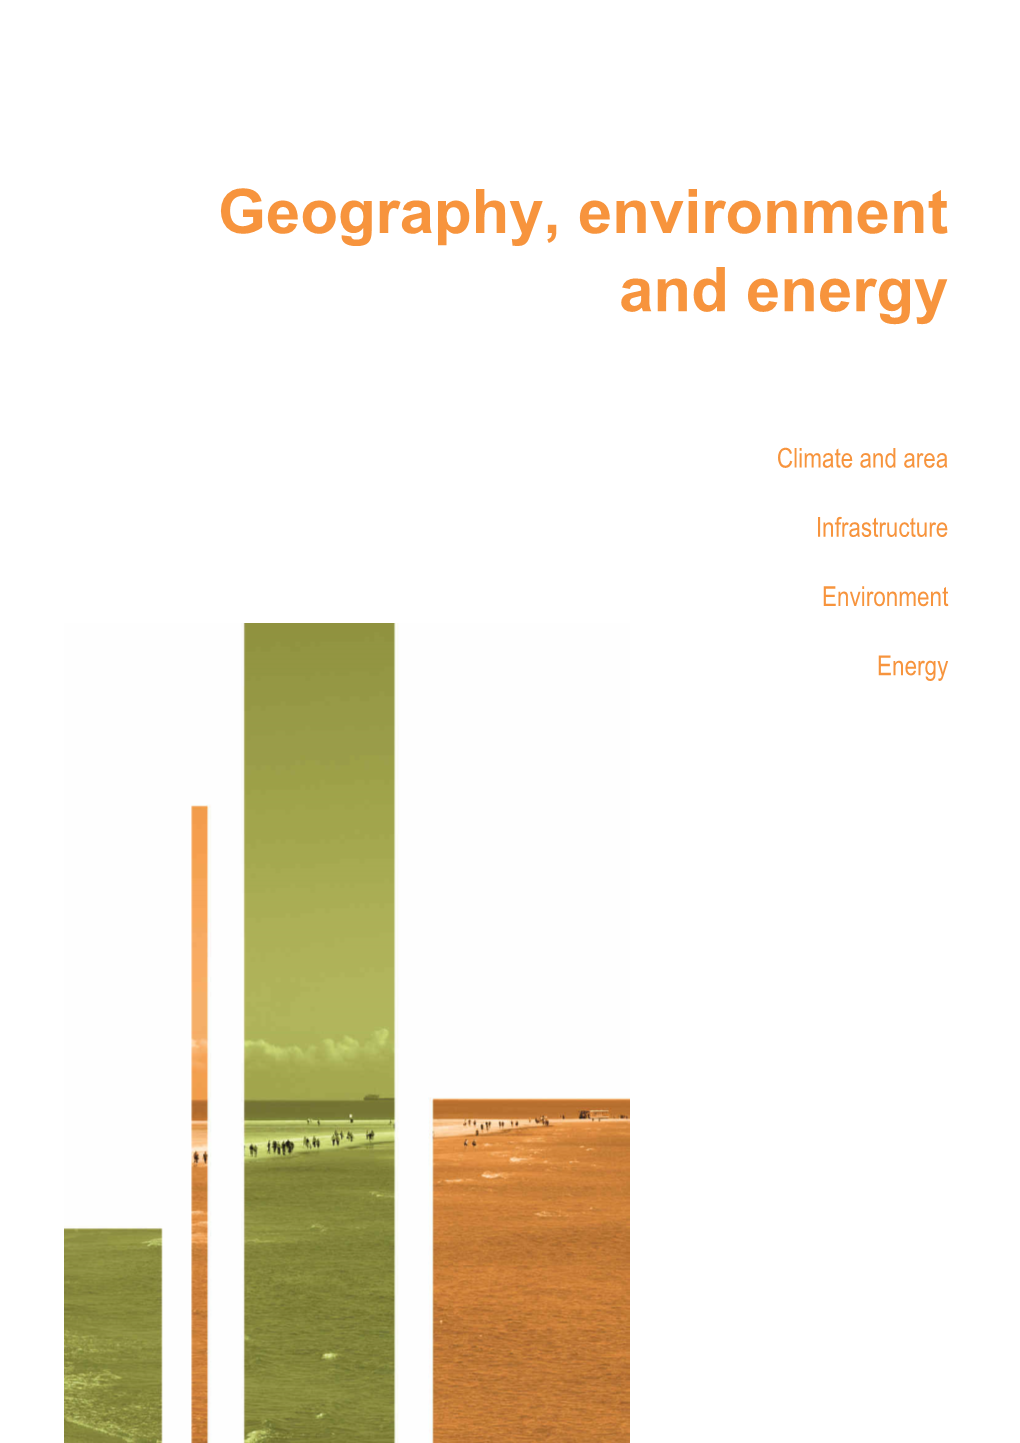 Geography, Environment and Energy.Docx (X:100.0%, Y:100.0%) Created by Grafikhuset Publi PDF